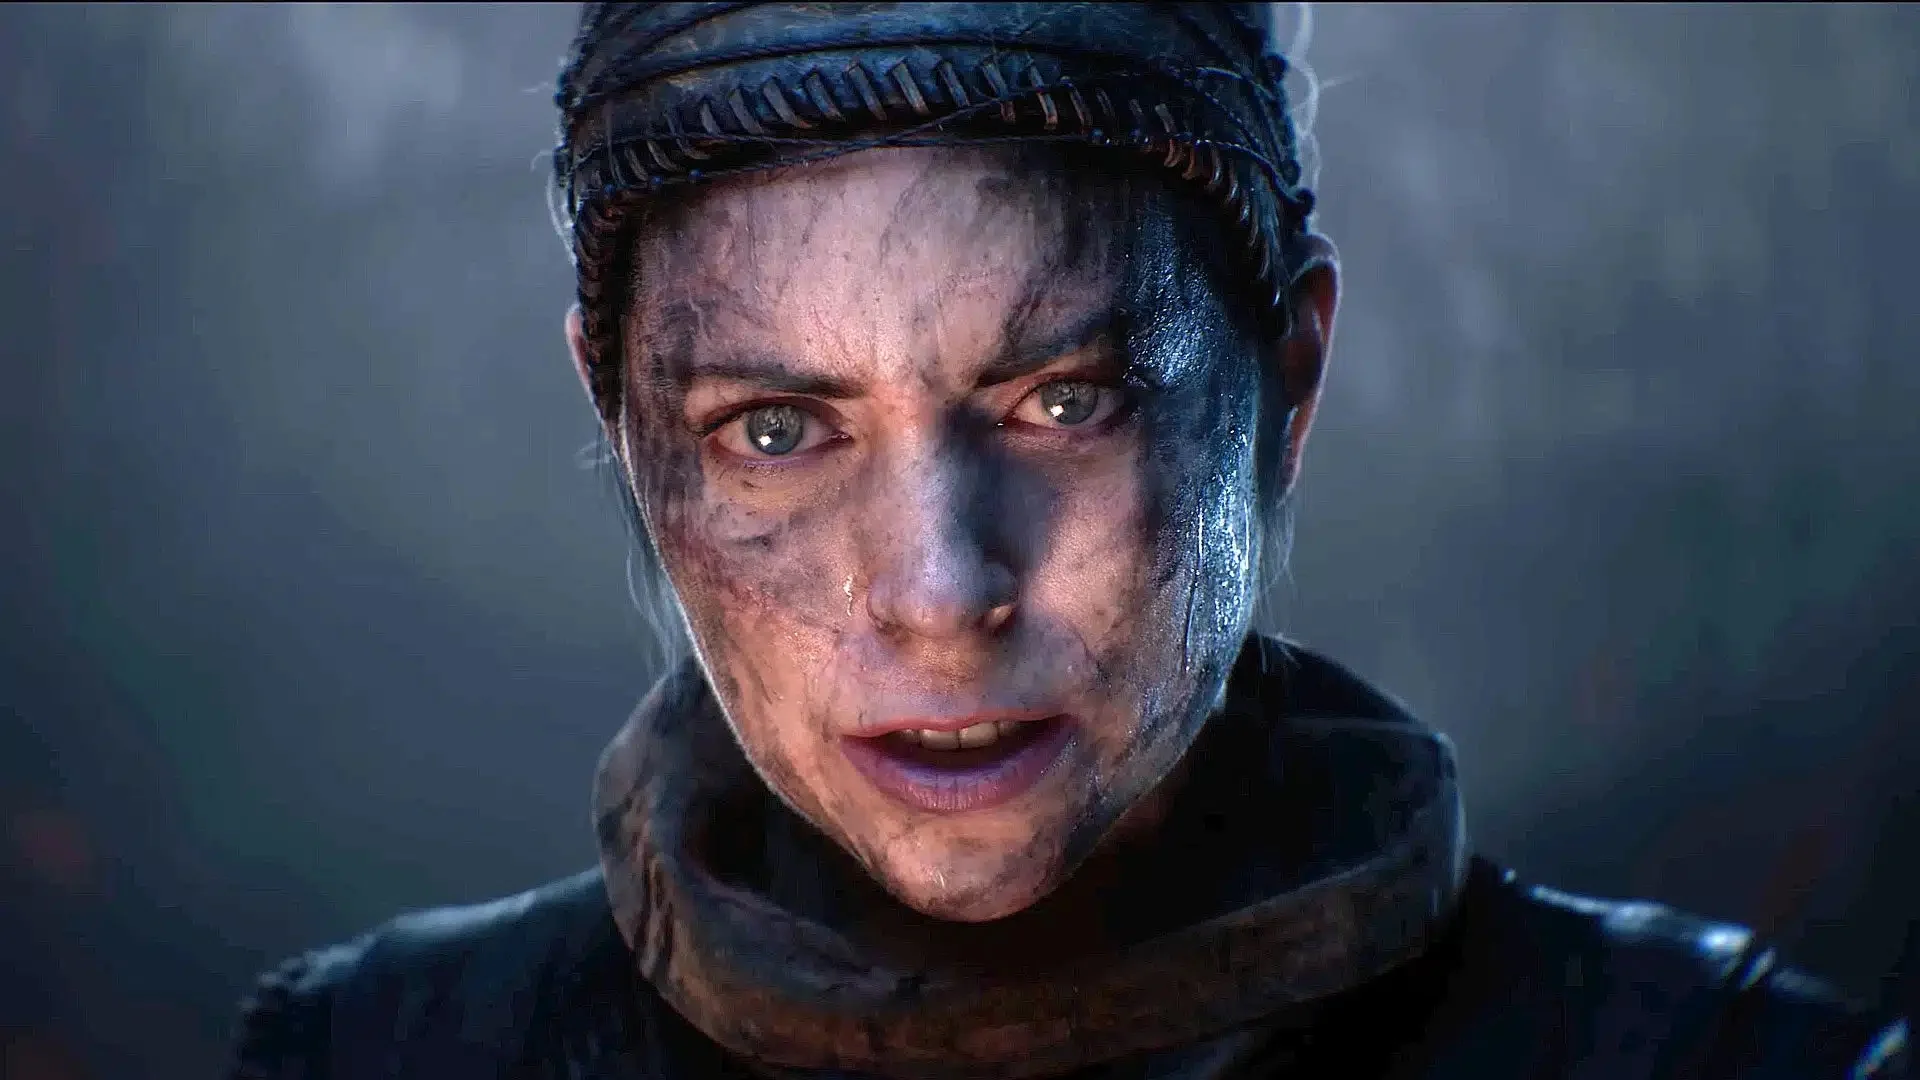 Hellblade 2 Set for 8-Hour Epic: Ninja Theory's AAA Title Hits Xbox in May